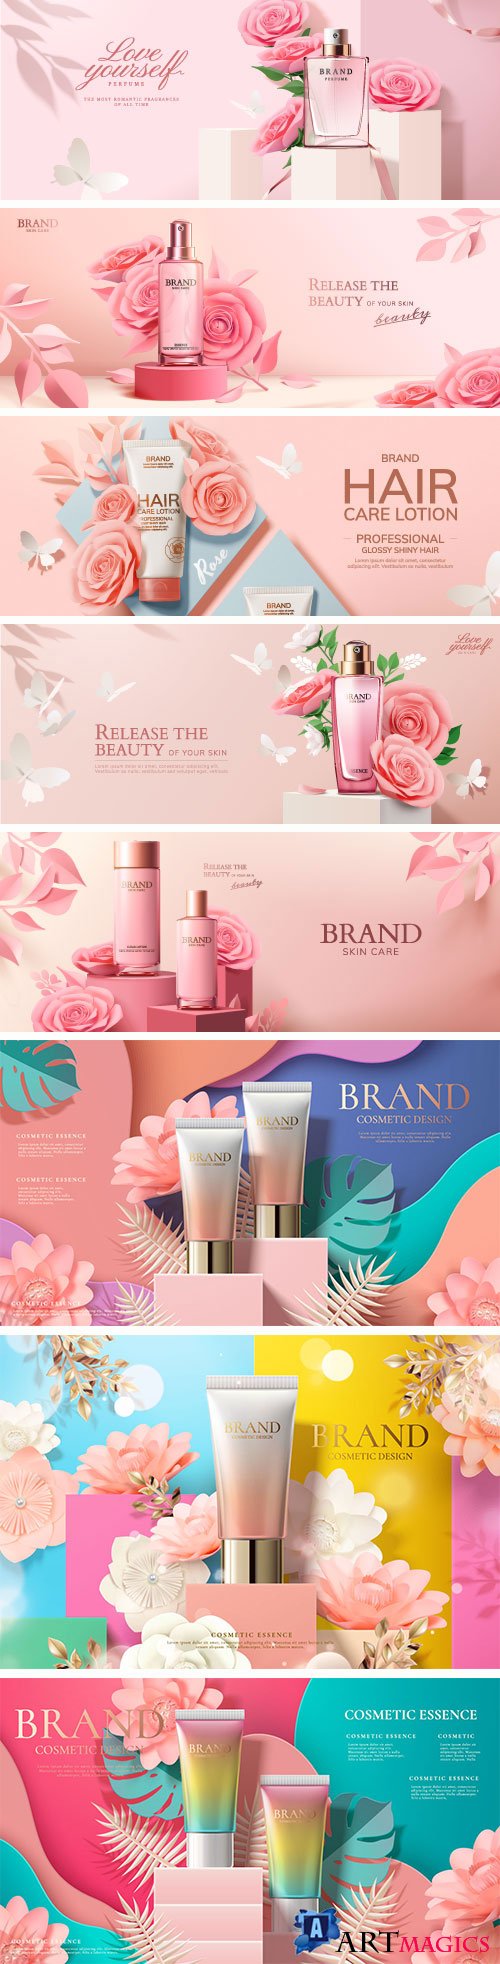 Brand cosmetic design, foundation banner ads # 7